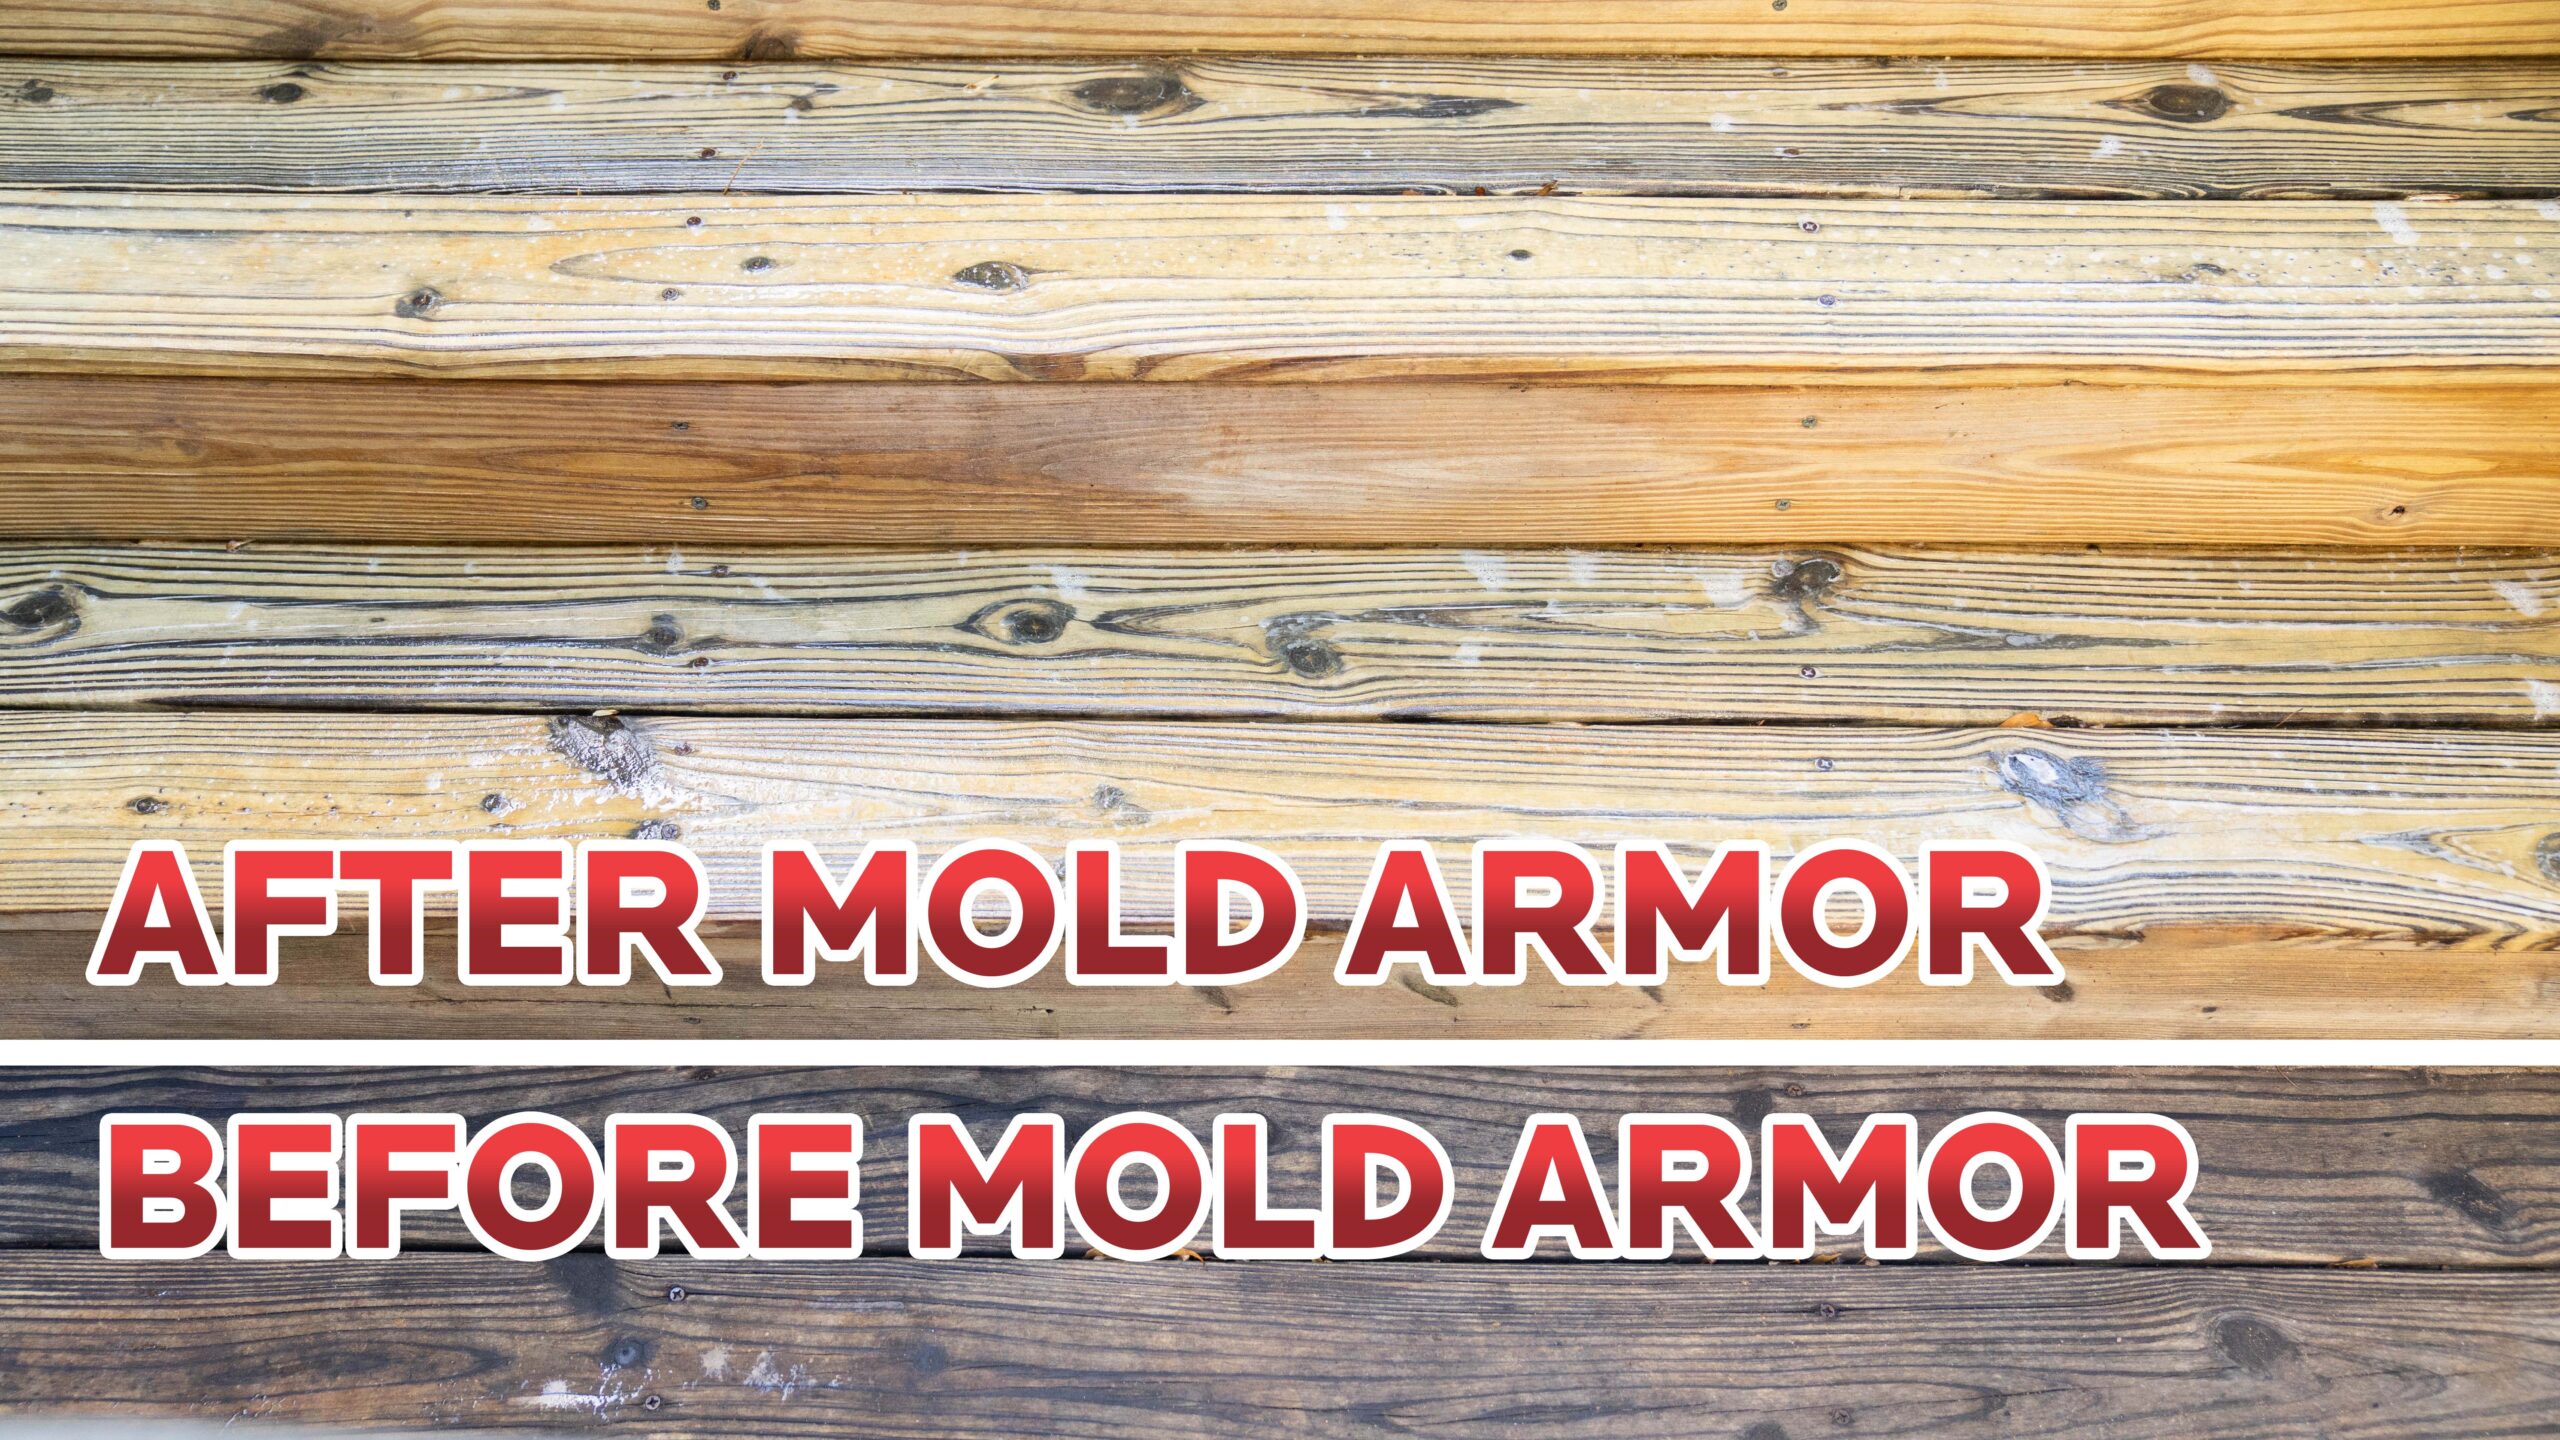 Mold Armor E-Z Deck, Fence & Patio Wash as low as $8.87 Shipped Free (Reg.  $20) - Fabulessly Frugal